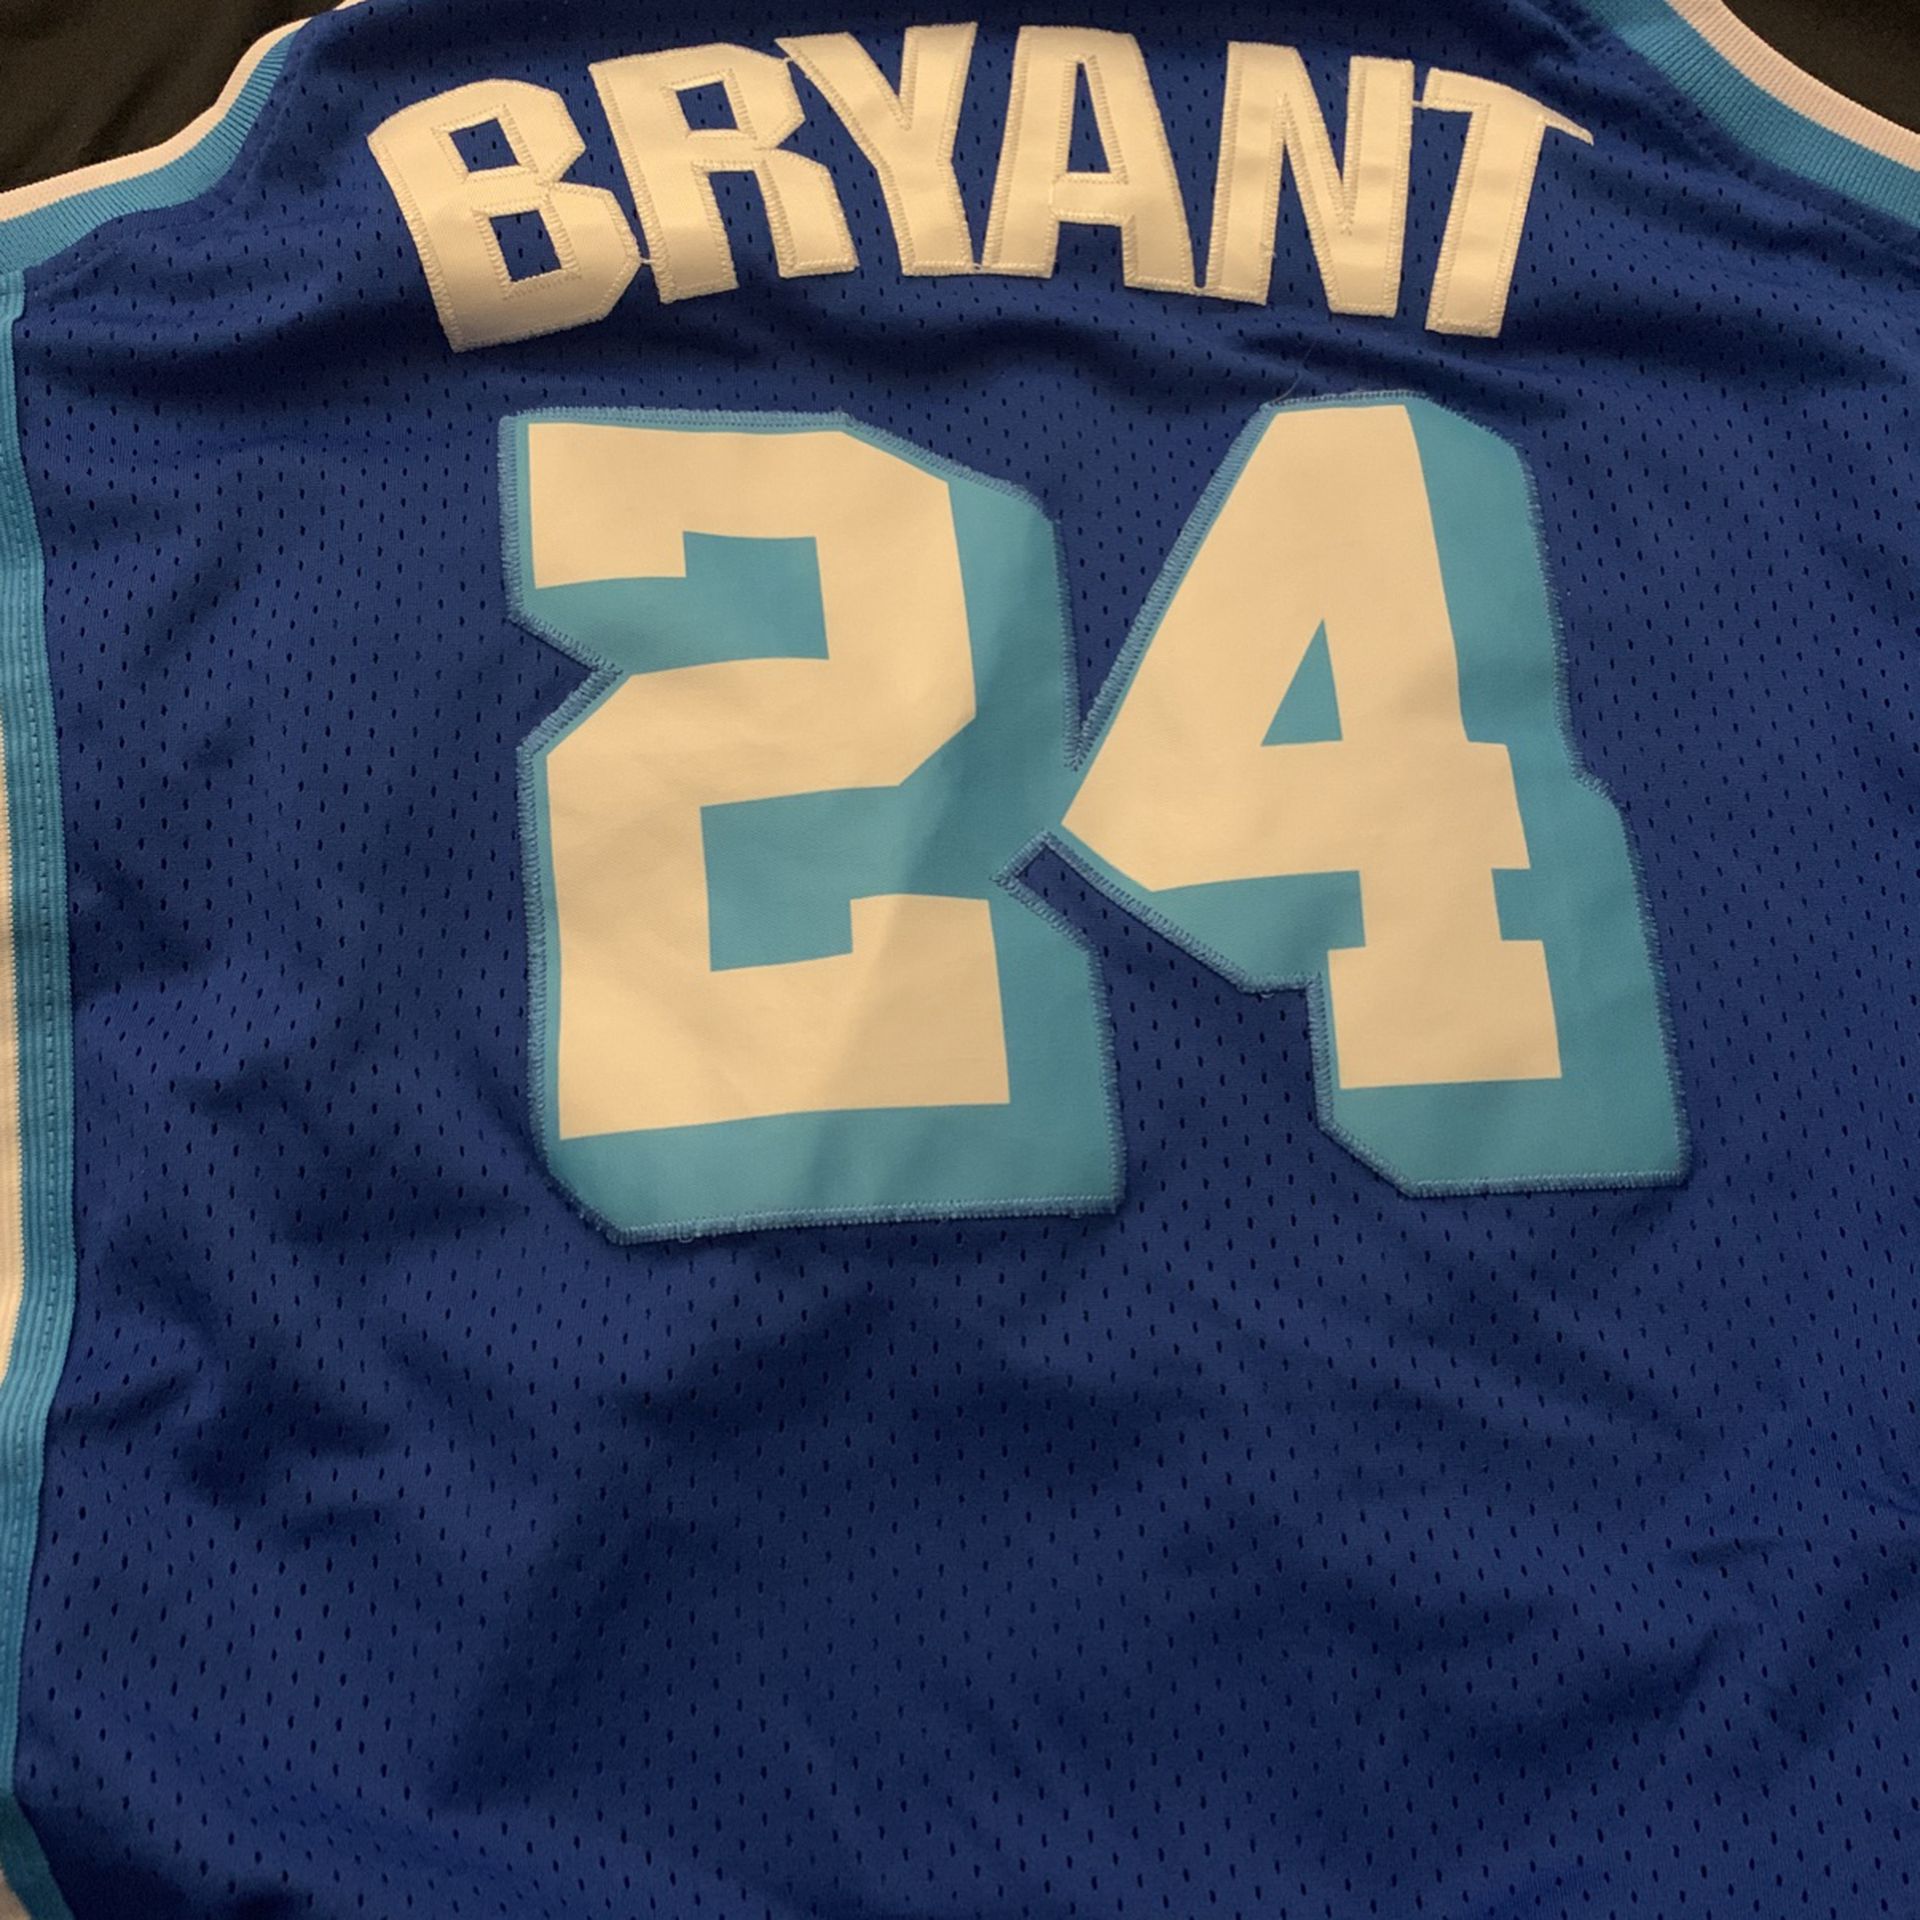 Kobe Bryant Complete Crenshaw Outfit! for Sale in Largo, FL - OfferUp